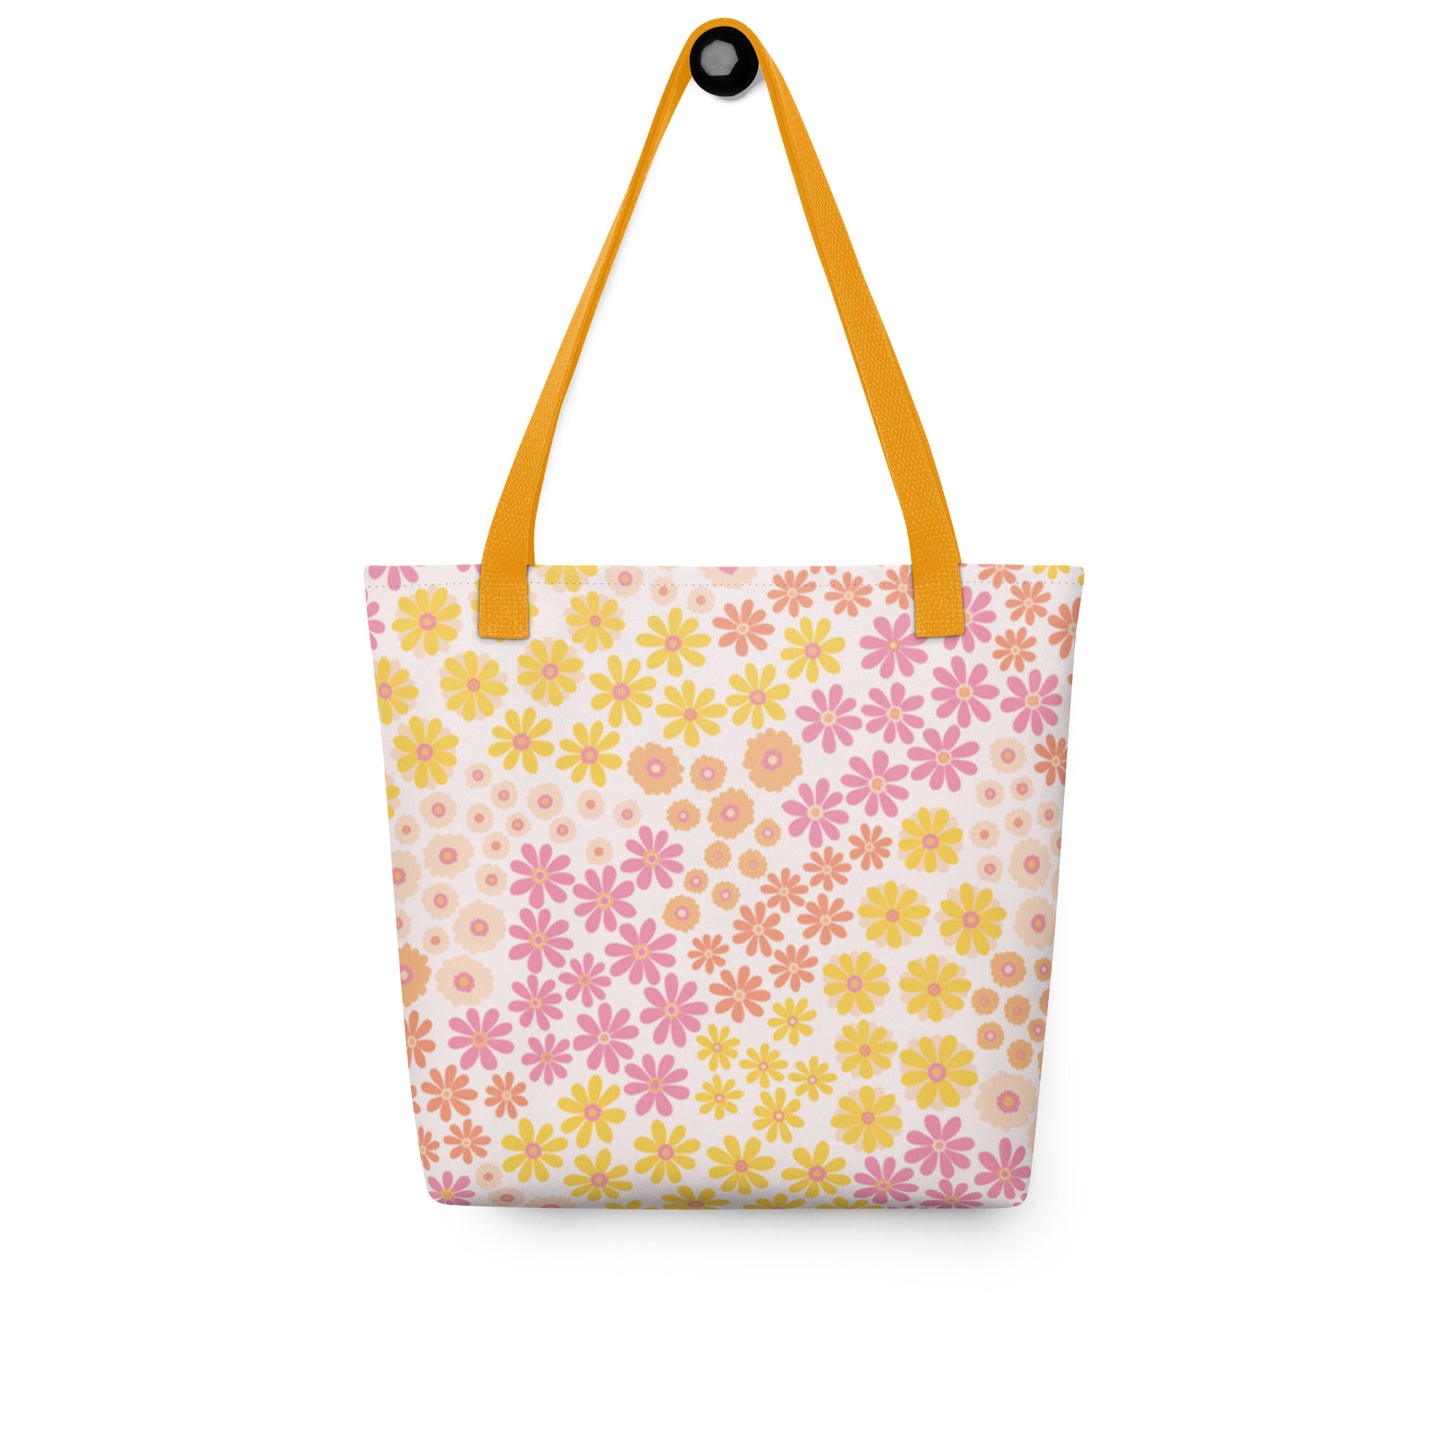 Mireille Fine Art, floral all-over print tote back with dual yellow handles, interior zipper tote bag